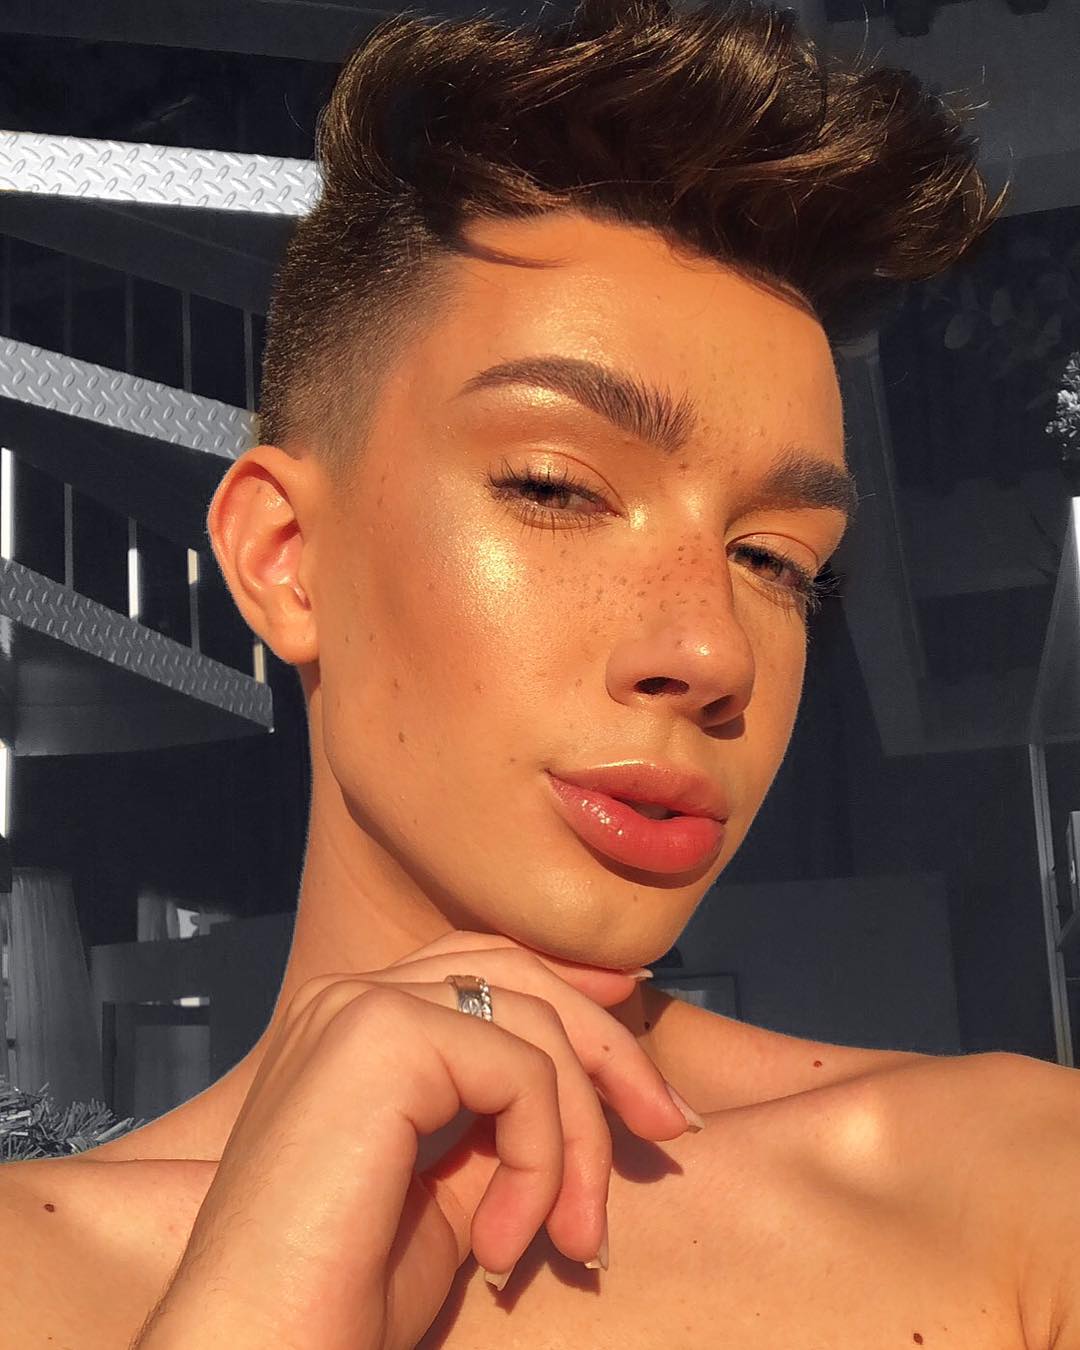 James Charles With No Fresh-Faced Selfies